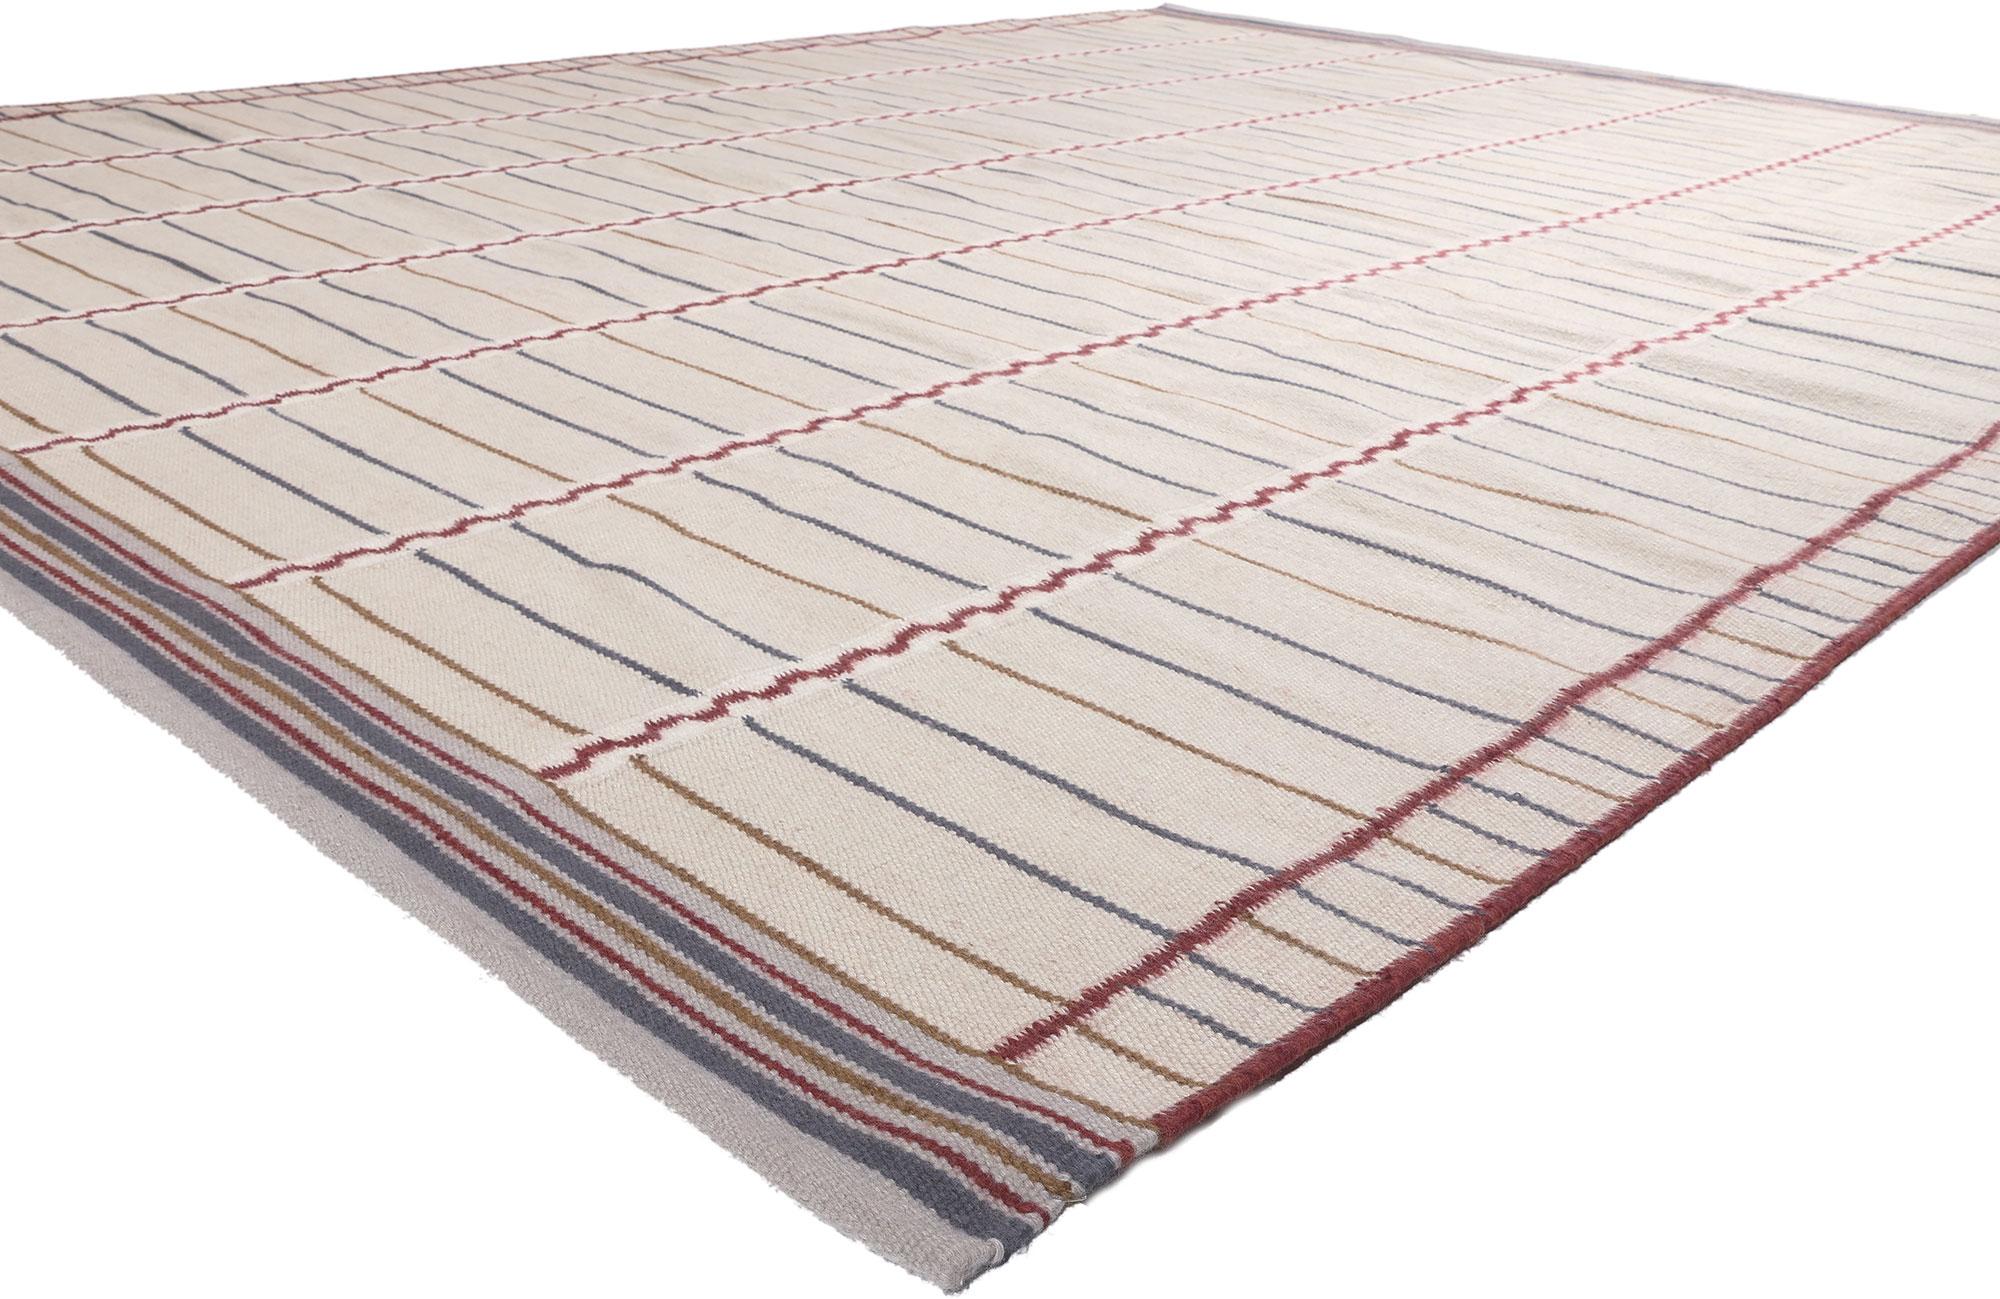 30932 New Swedish Inspired Kilim Rug, 10'00 x 13'02.
Scandinavian Modern meets Cubist Minimalism in this handwoven wool Swedish-inspired kilim rug. The simplistic linear design and minimal color scheme woven into this piece share a common theme of